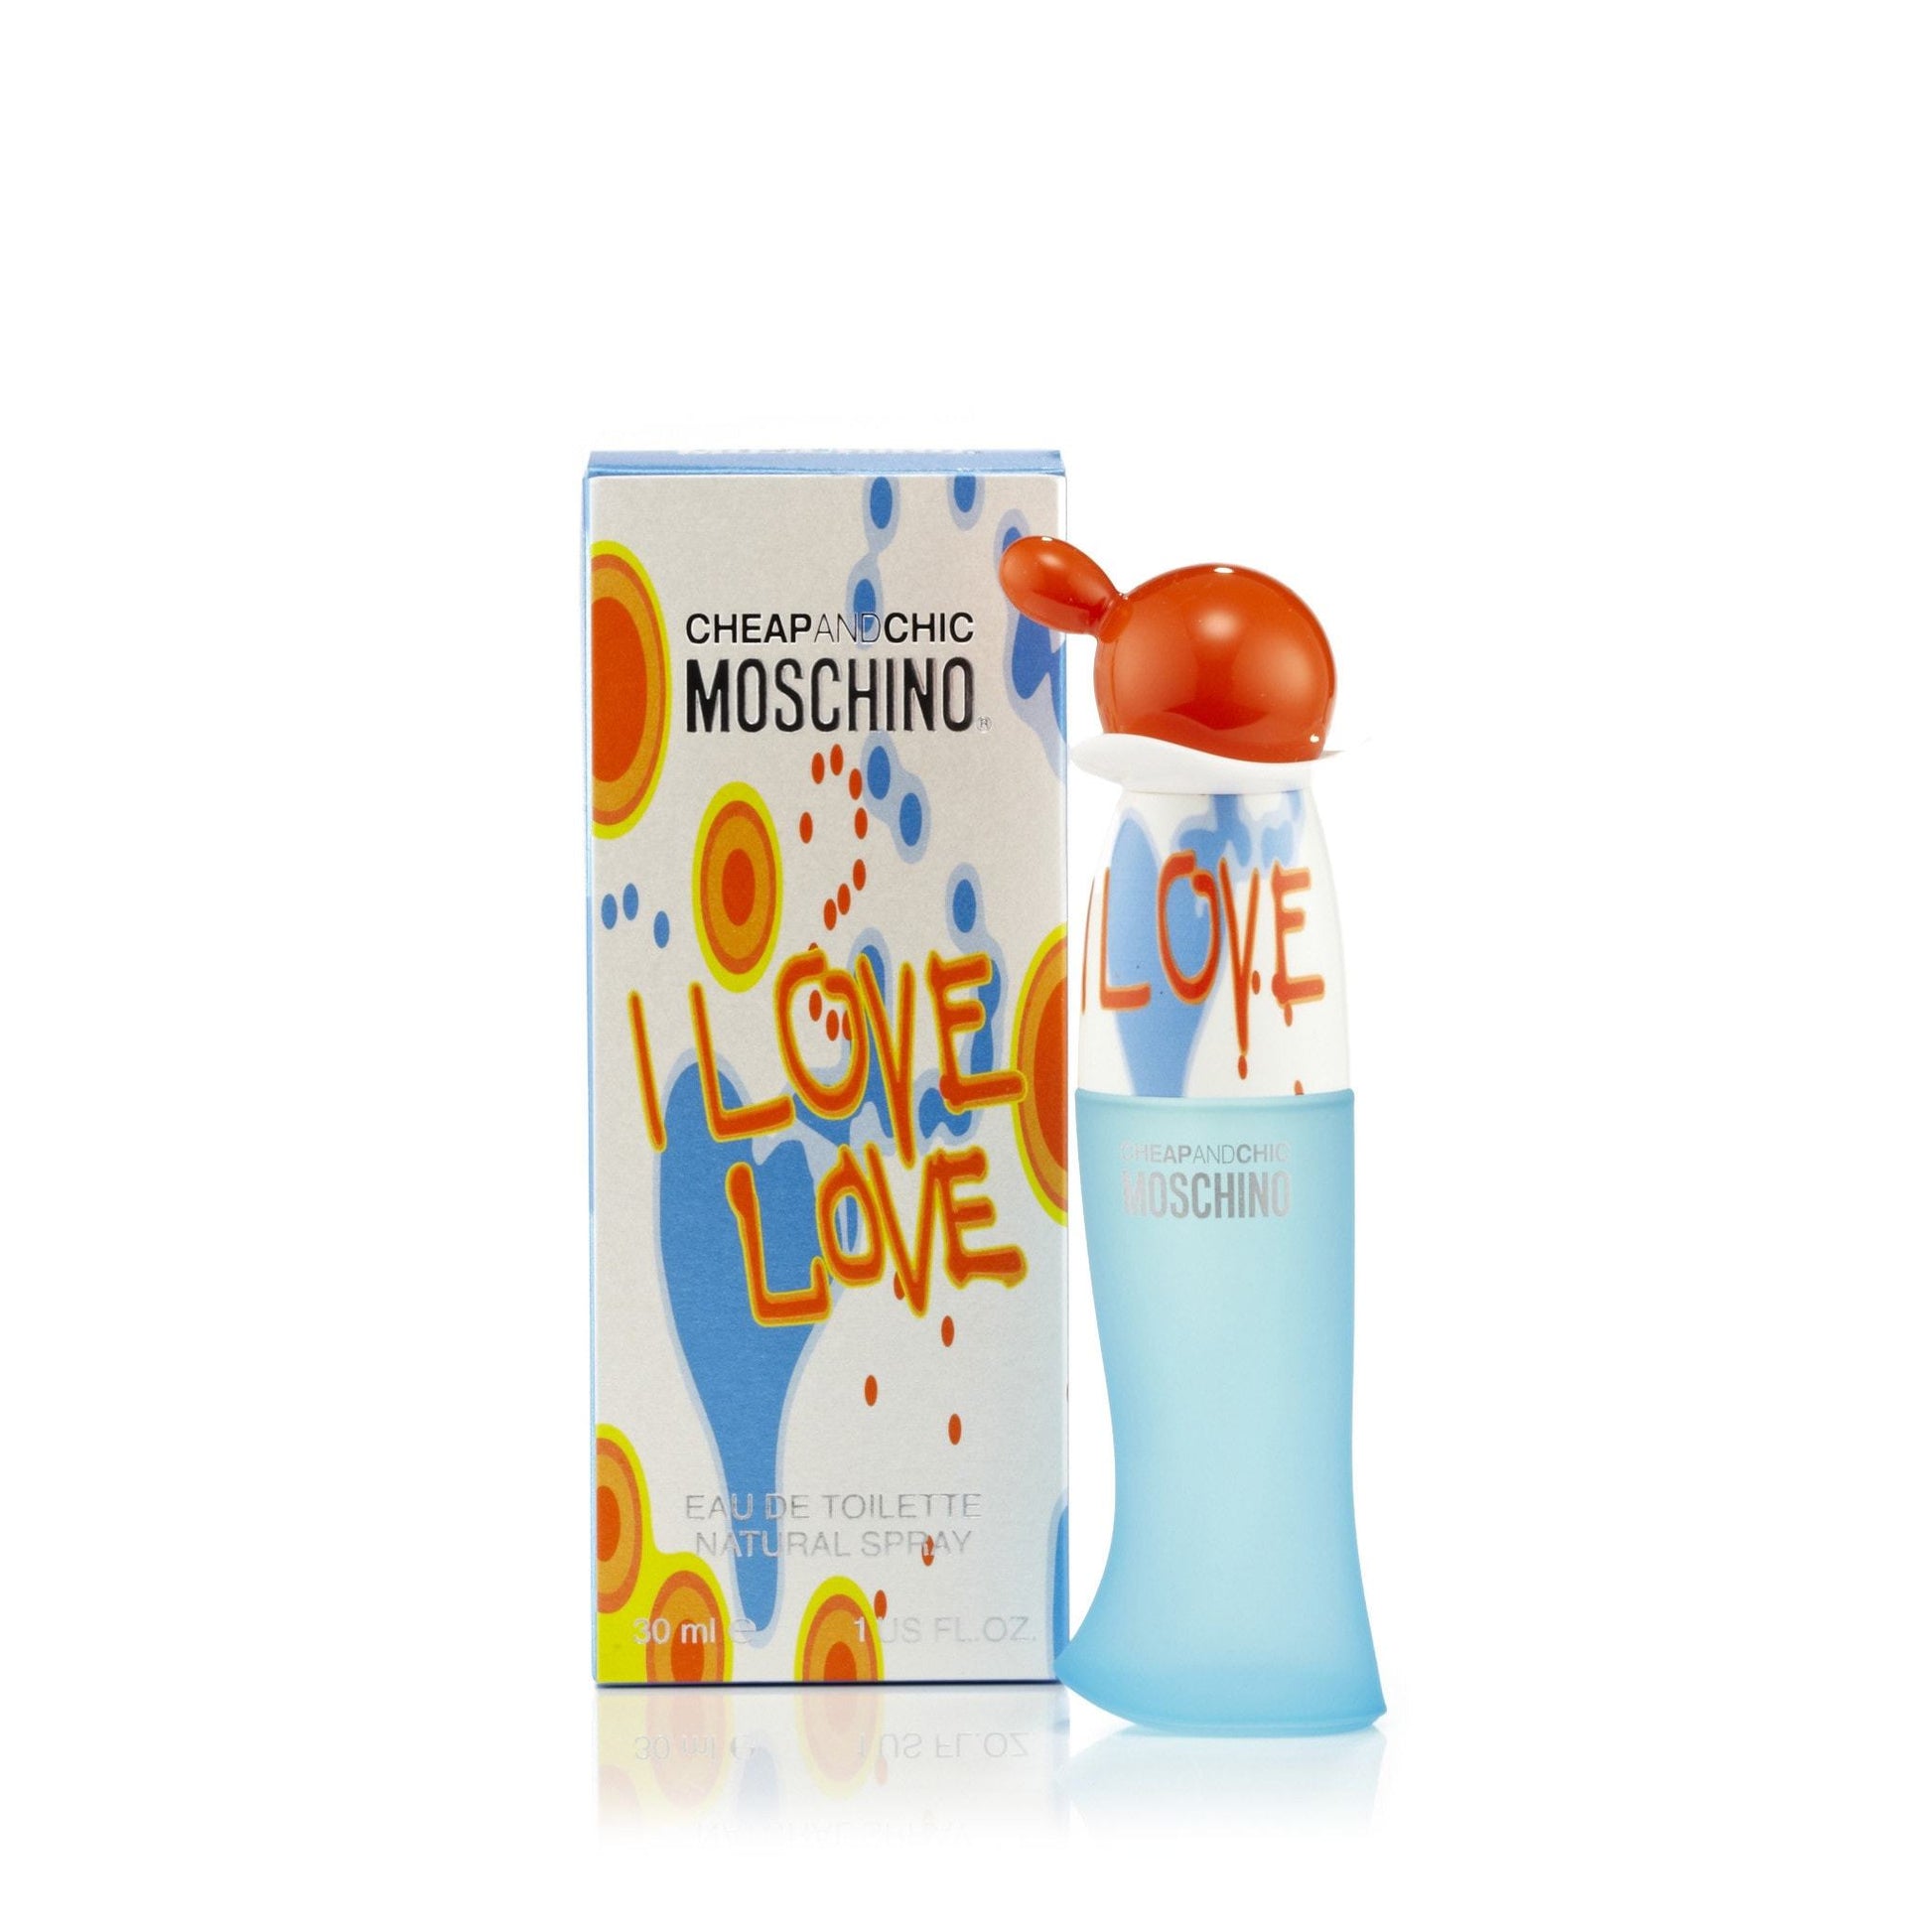 I Love Love Eau de Toilette Spray for Women by Moschino, Product image 5